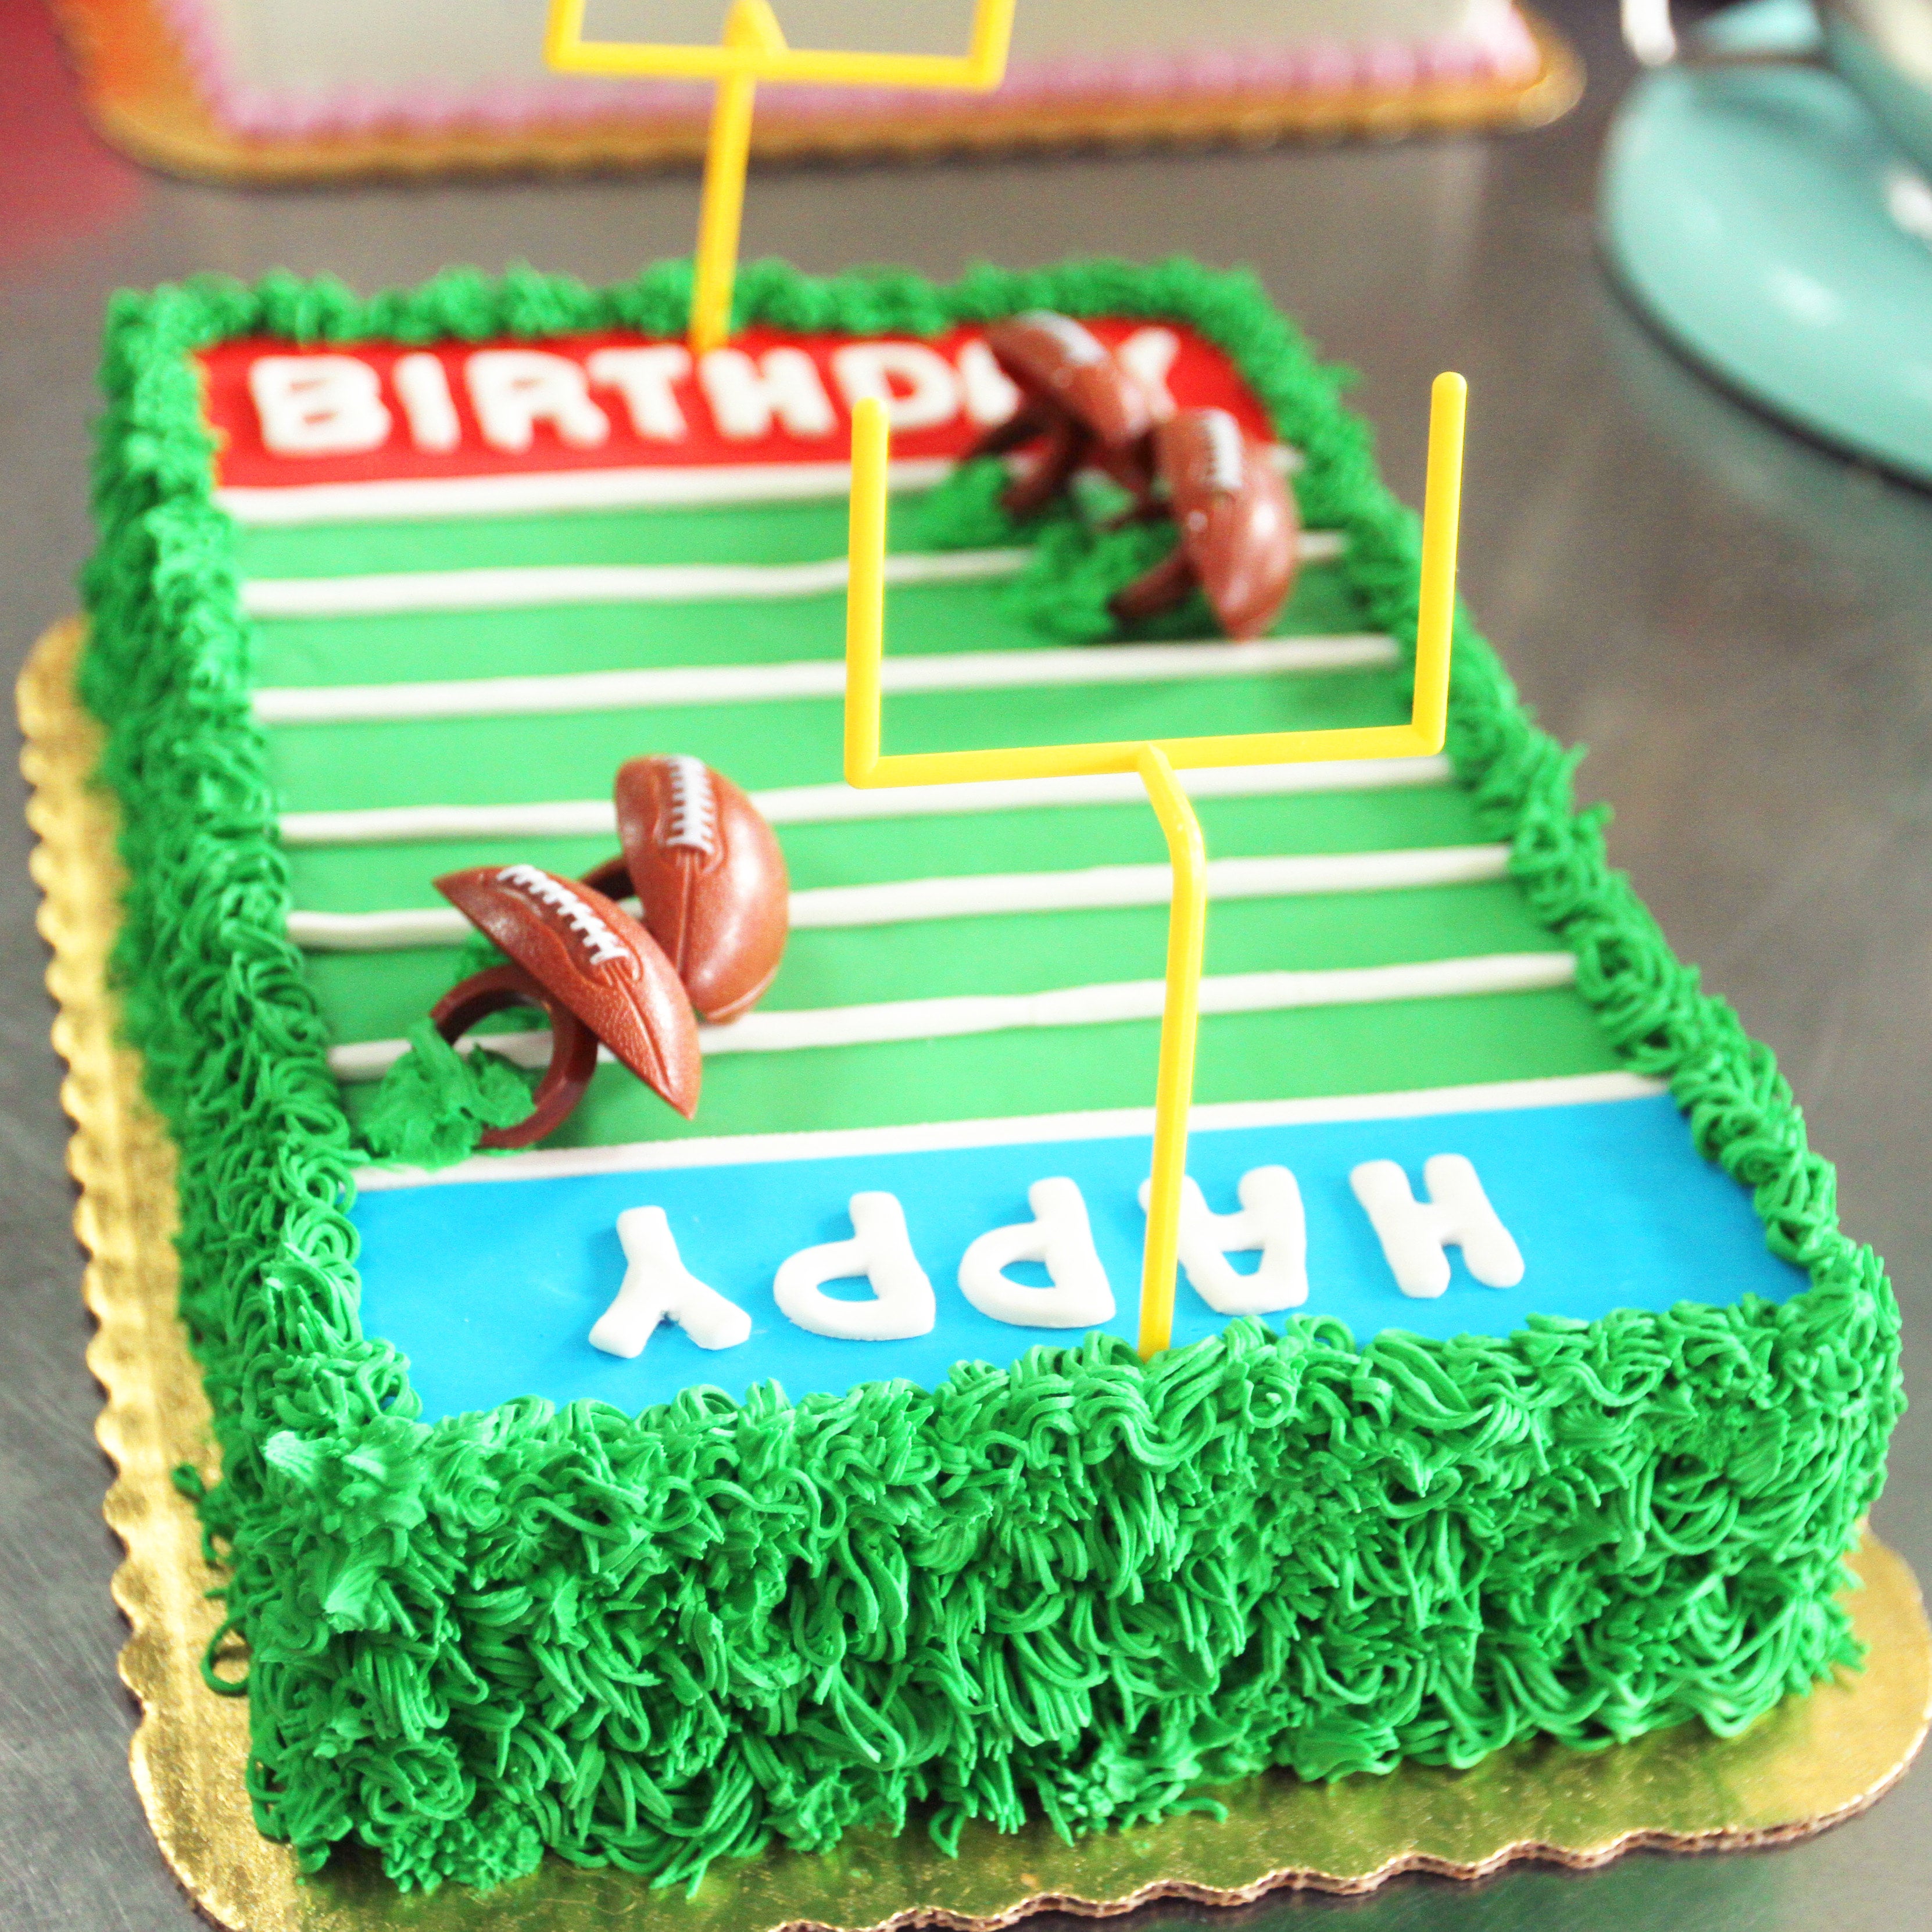 Tennessee Titans Football And Field Cake - CakeCentral.com